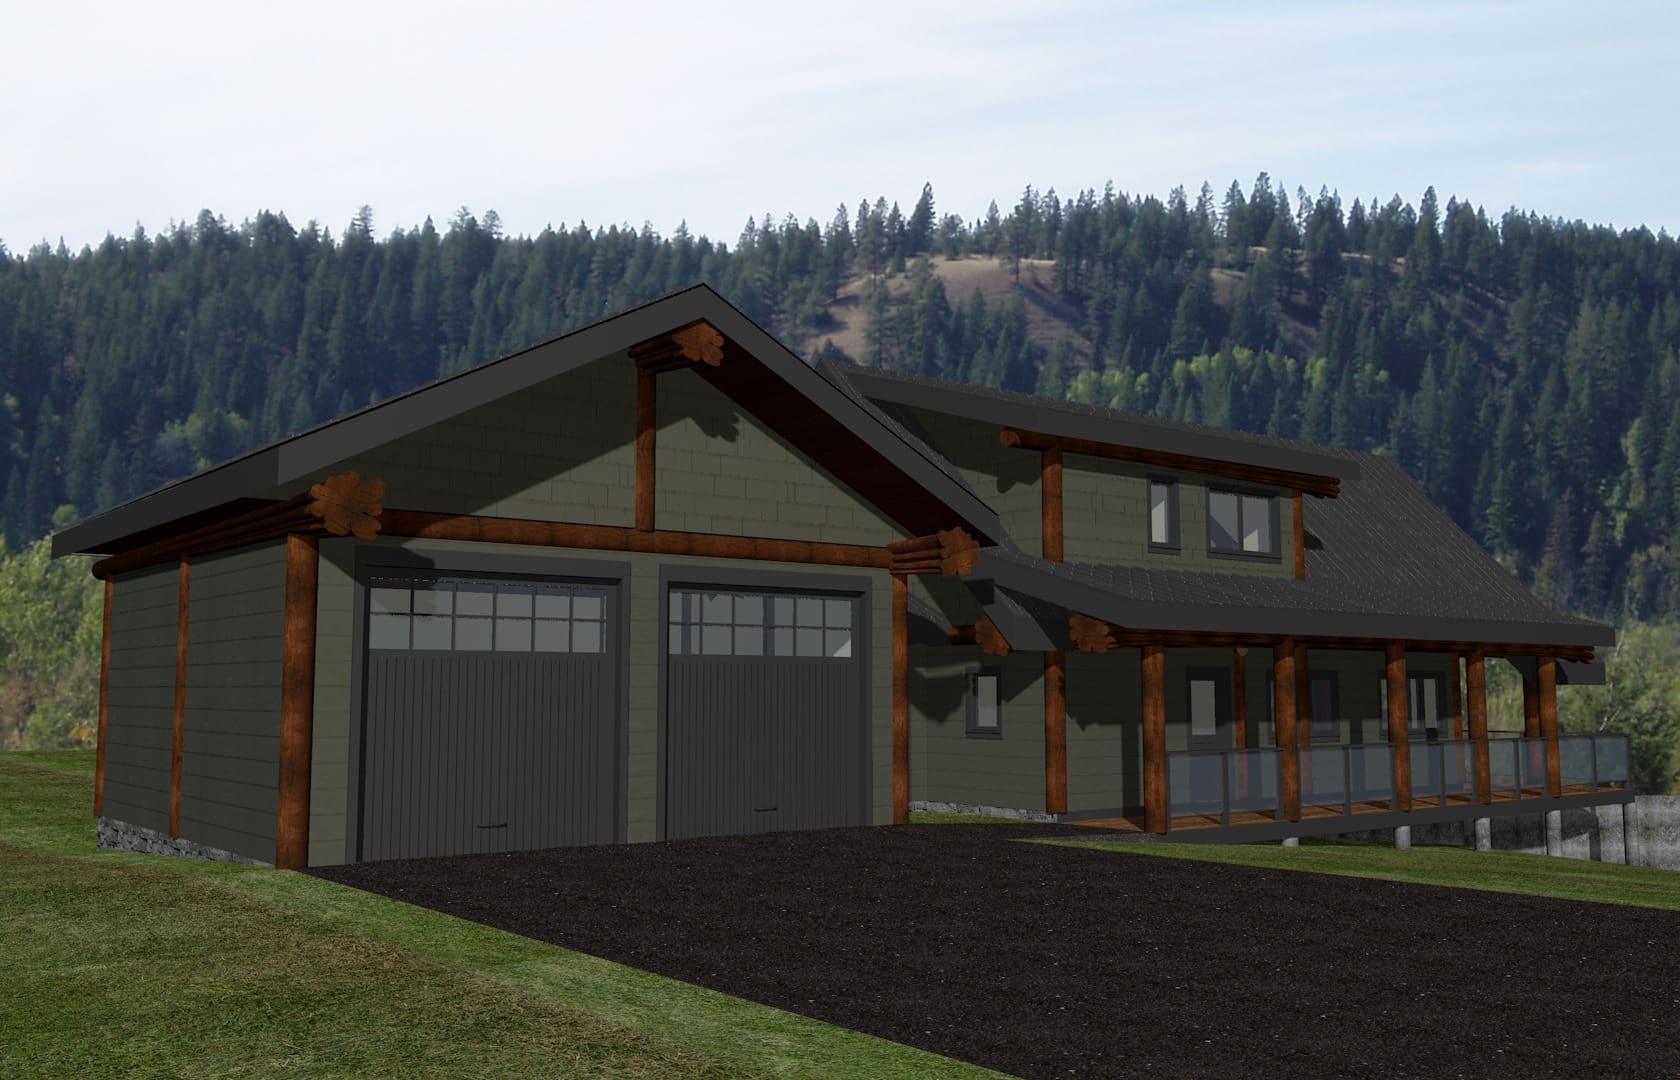 B.C Home builders custom cabin kit with attached garage.